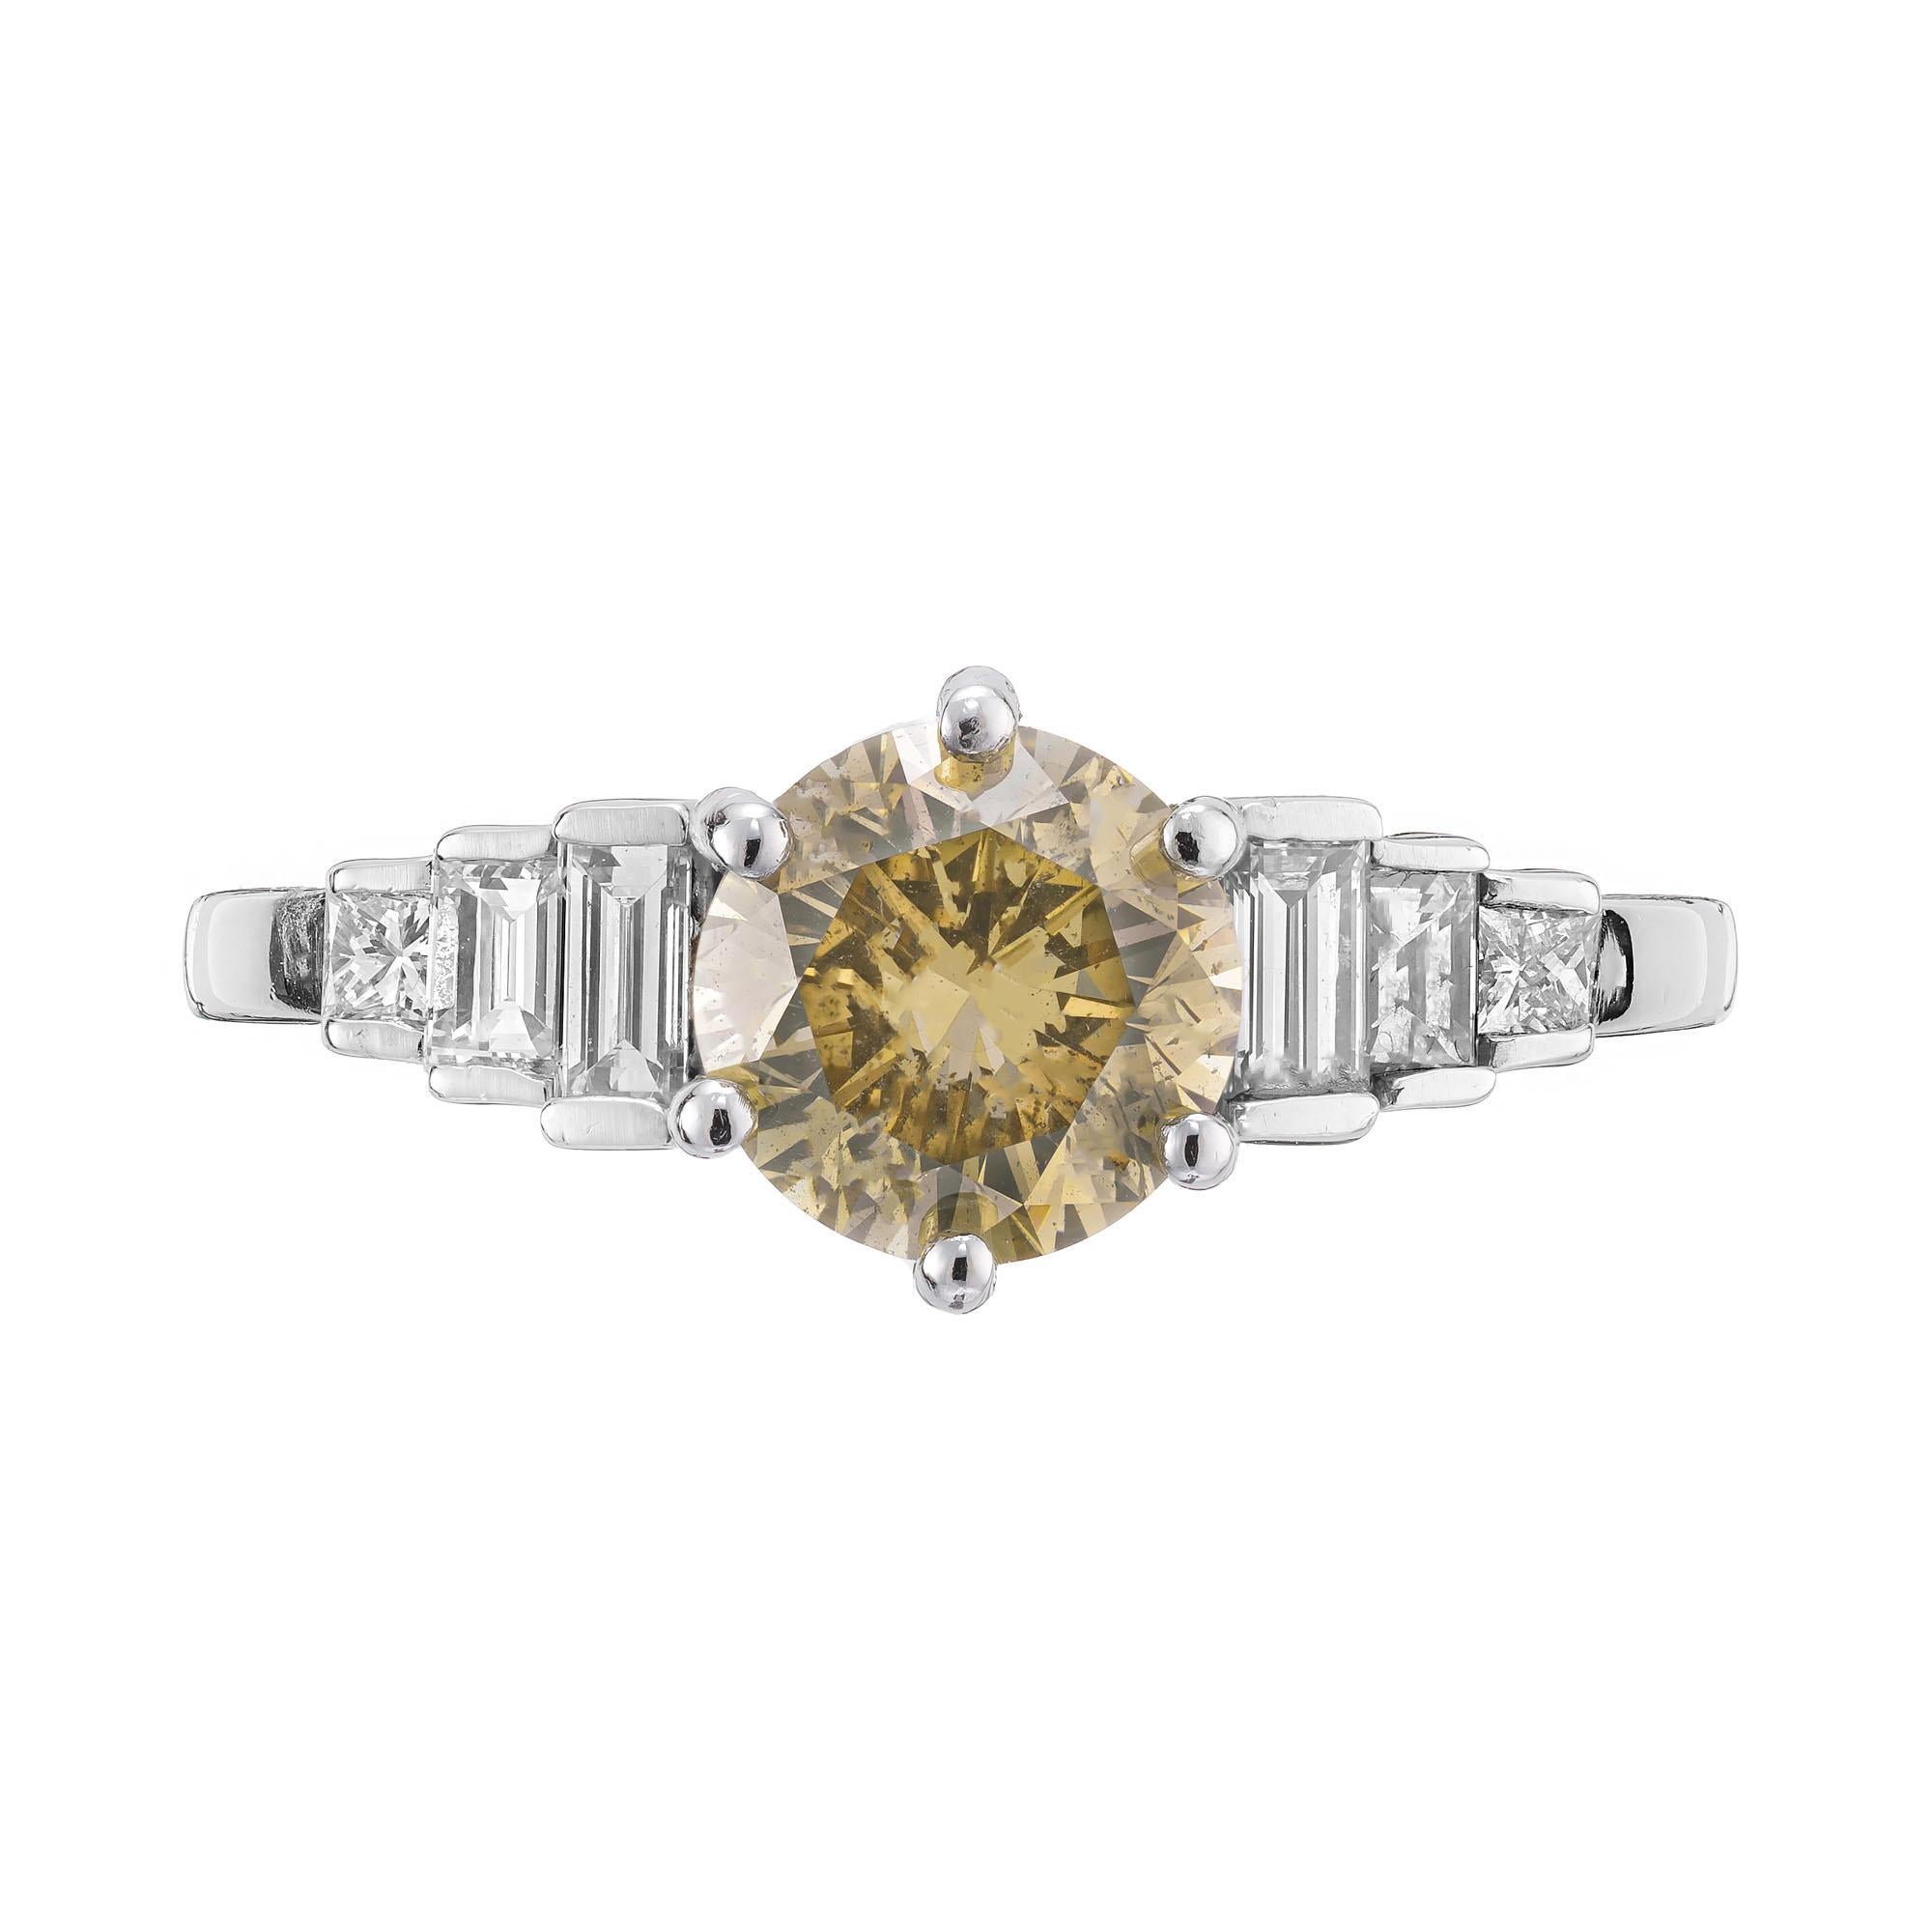 1960's natural brown and yellow diamond engagement ring. GIA certified round center stone in a 6 prong platinum setting with graduated baguette and princess cut side diamonds.  

1 round fancy yellow brown diamond, approx. total weight 1.64cts, SI2,